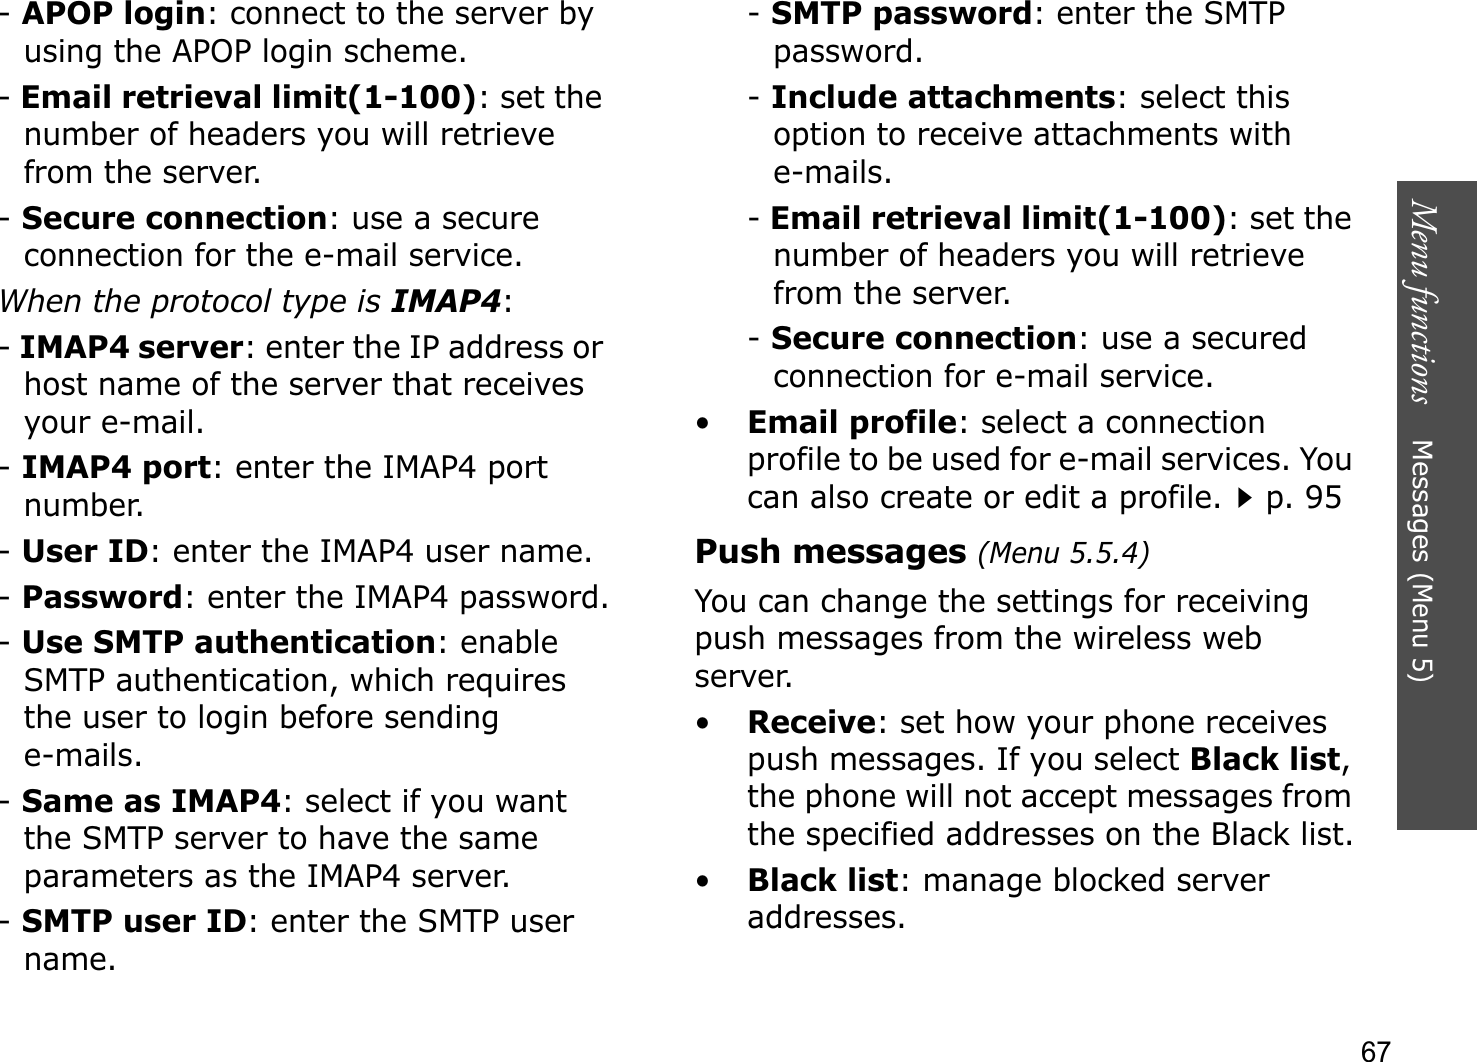 Menu functions    Messages (Menu 5)67-APOP login: connect to the server by using the APOP login scheme. -Email retrieval limit(1-100): set the number of headers you will retrieve from the server.-Secure connection: use a secure connection for the e-mail service.When the protocol type is IMAP4:-IMAP4 server: enter the IP address or host name of the server that receives your e-mail.-IMAP4 port: enter the IMAP4 port number.-User ID: enter the IMAP4 user name.-Password: enter the IMAP4 password.-Use SMTP authentication: enable SMTP authentication, which requires the user to login before sending e-mails.-Same as IMAP4: select if you want the SMTP server to have the same parameters as the IMAP4 server.-SMTP user ID: enter the SMTP user name.-SMTP password: enter the SMTP password.-Include attachments: select this option to receive attachments with e-mails.-Email retrieval limit(1-100): set the number of headers you will retrieve from the server.-Secure connection: use a secured connection for e-mail service.•Email profile: select a connection profile to be used for e-mail services. You can also create or edit a profile.p. 95Push messages (Menu 5.5.4)You can change the settings for receiving push messages from the wireless web server.•Receive: set how your phone receives push messages. If you select Black list,the phone will not accept messages from the specified addresses on the Black list.•Black list: manage blocked server addresses.